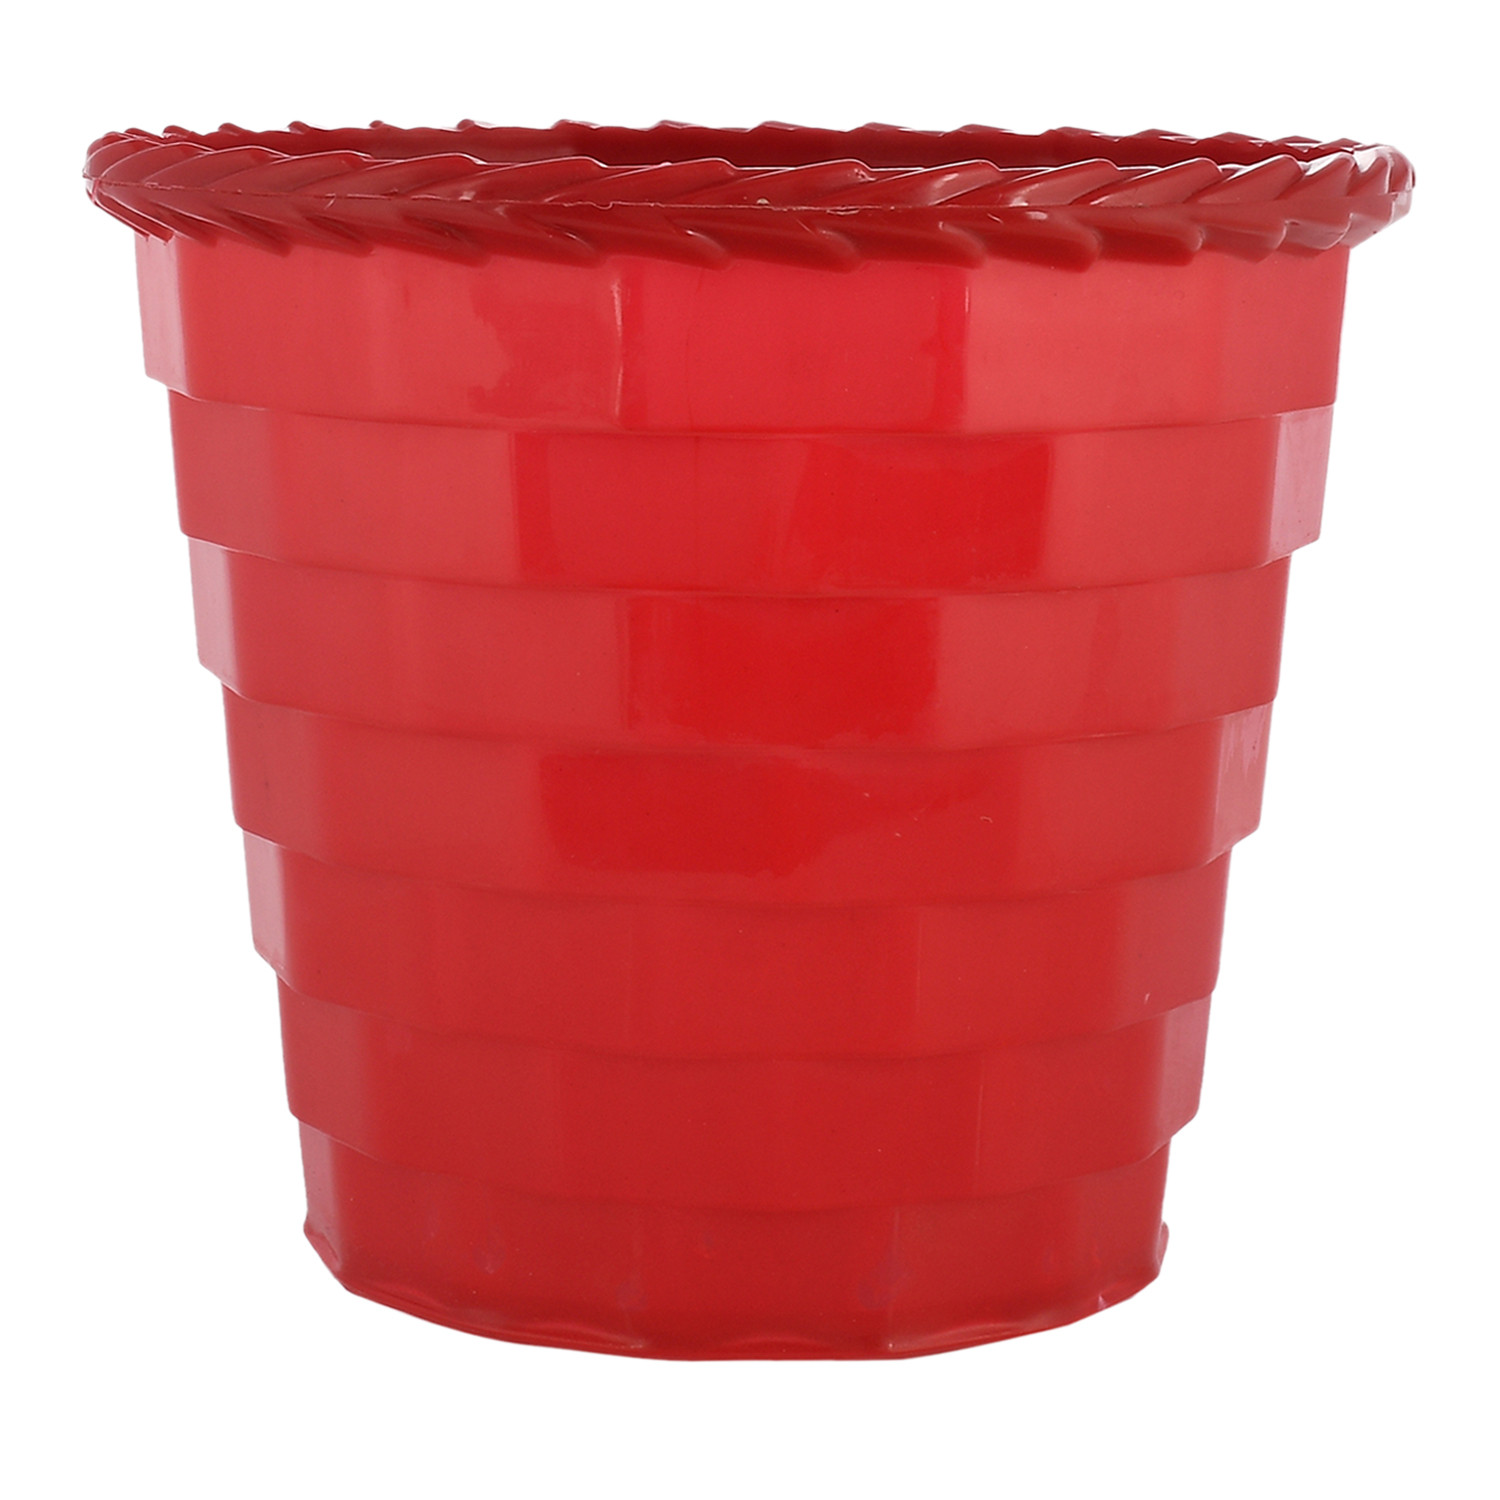 Kuber Industries Brick Flower Pot|Durable Plastic Flower Pots|Planters for Home Décor|Garden|Living Room|Balcony|8 Inch|Pack of 2 (Red & Grey)